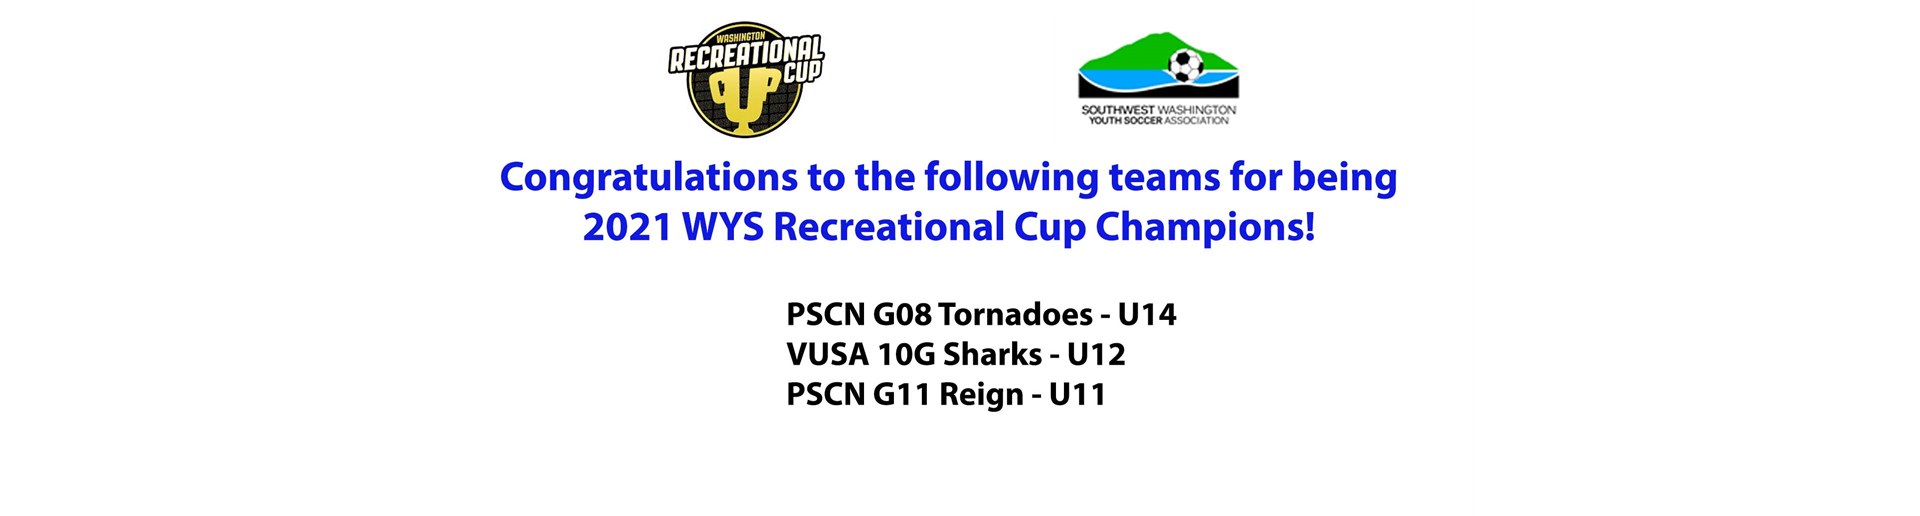 2021 Recreational Cup Information